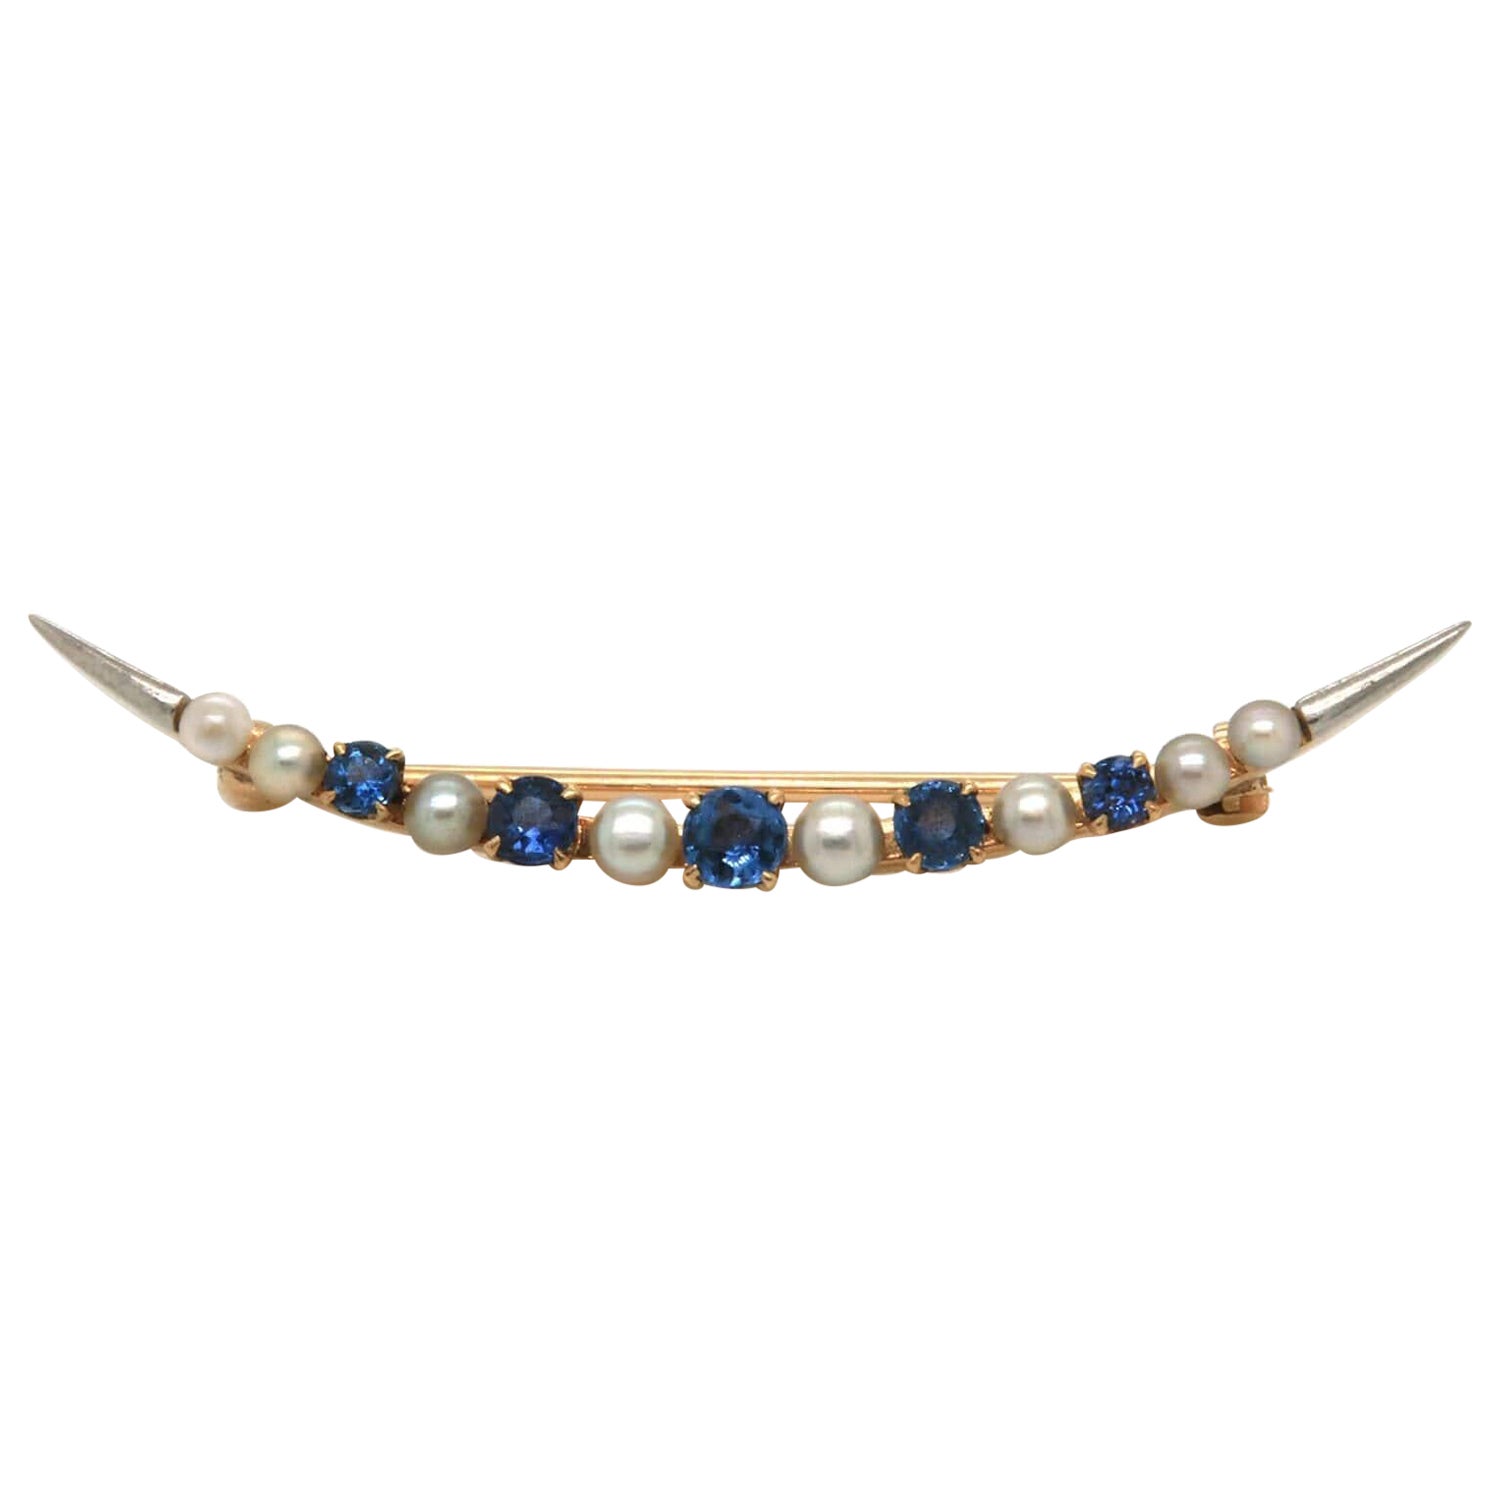 Vintage Sapphire and Pearl Crescent Moon Brooch in 14K Yellow Gold